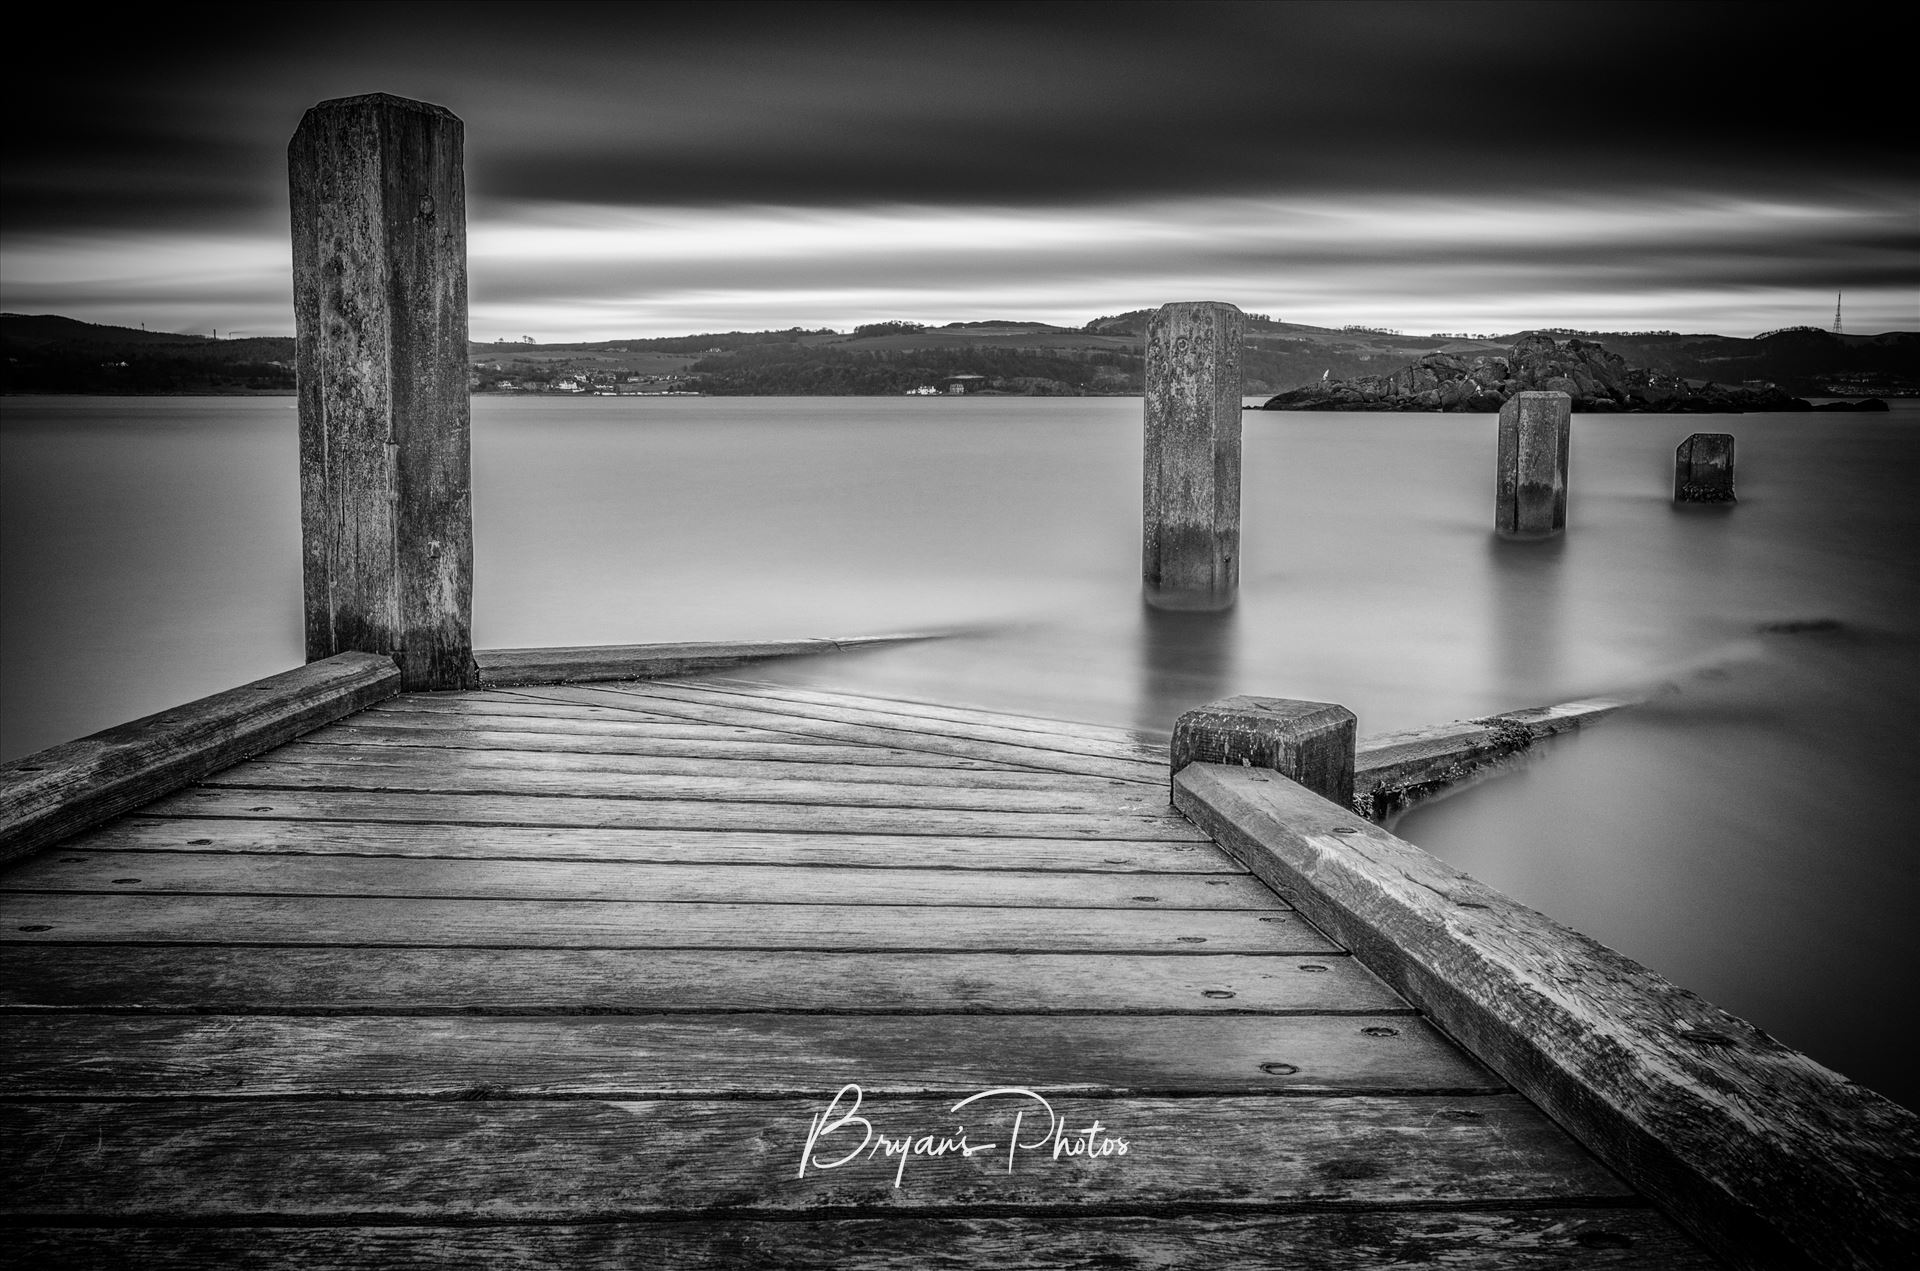 Inchcolm Jetty A black and white long exposure photograph taken from the jetty at Inchcolm Island looking towards the Fife coast. by Bryans Photos